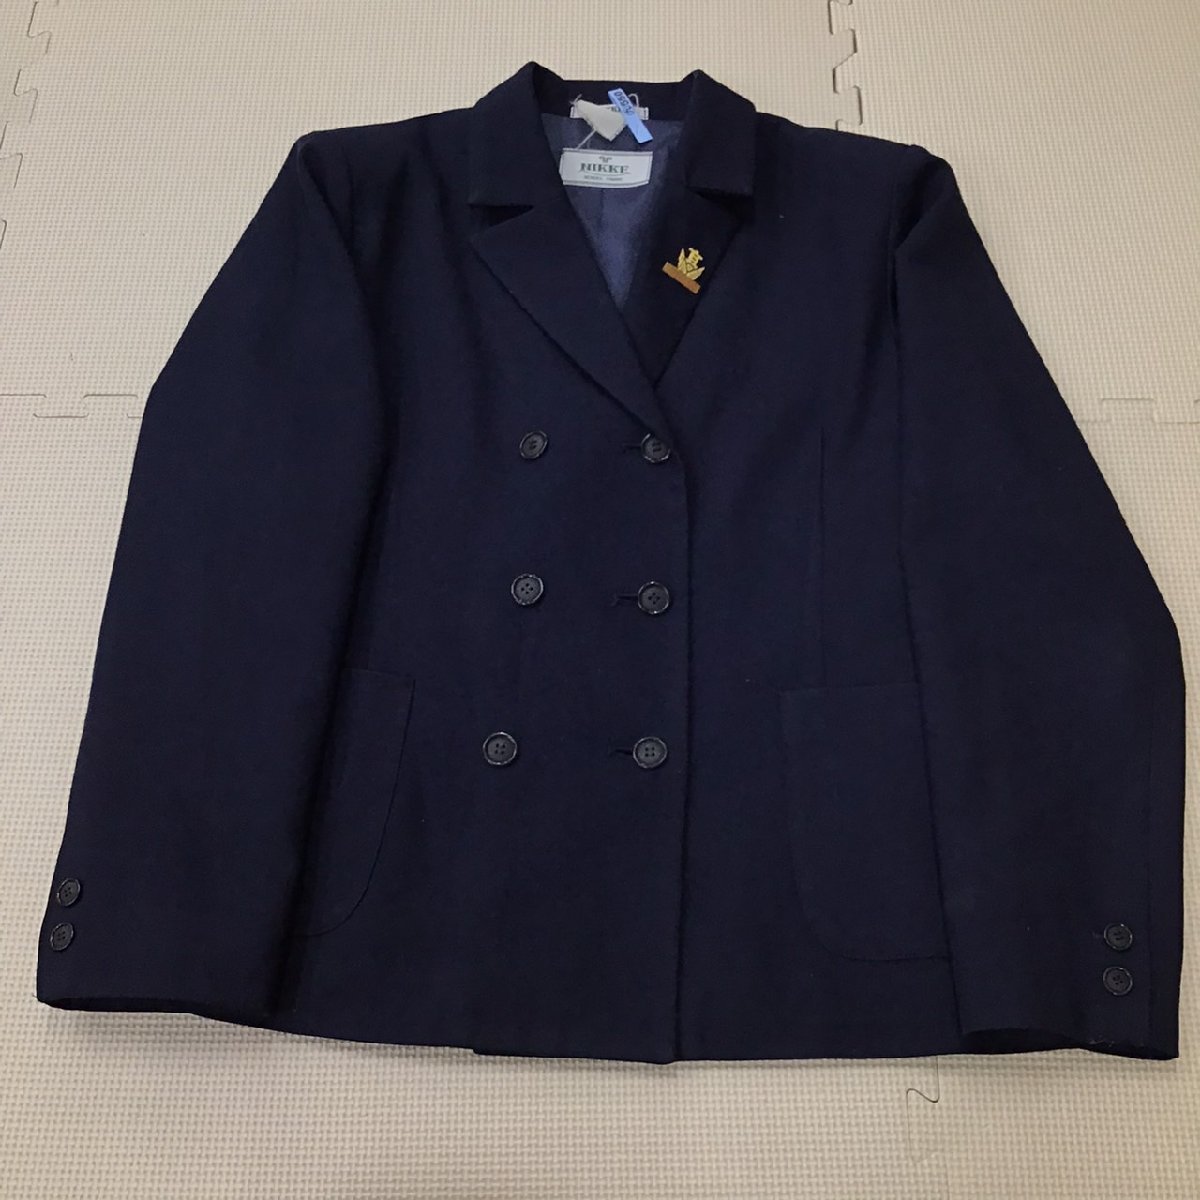 O128/( used ) Hyogo prefecture Tatsuno high school woman uniform 3 point /. chapter /M/W63/ height 63/ blaser / blouse / skirt /NIKKE/ navy blue / winter clothes / middle ./ high school / woman student / uniform / school uniform 